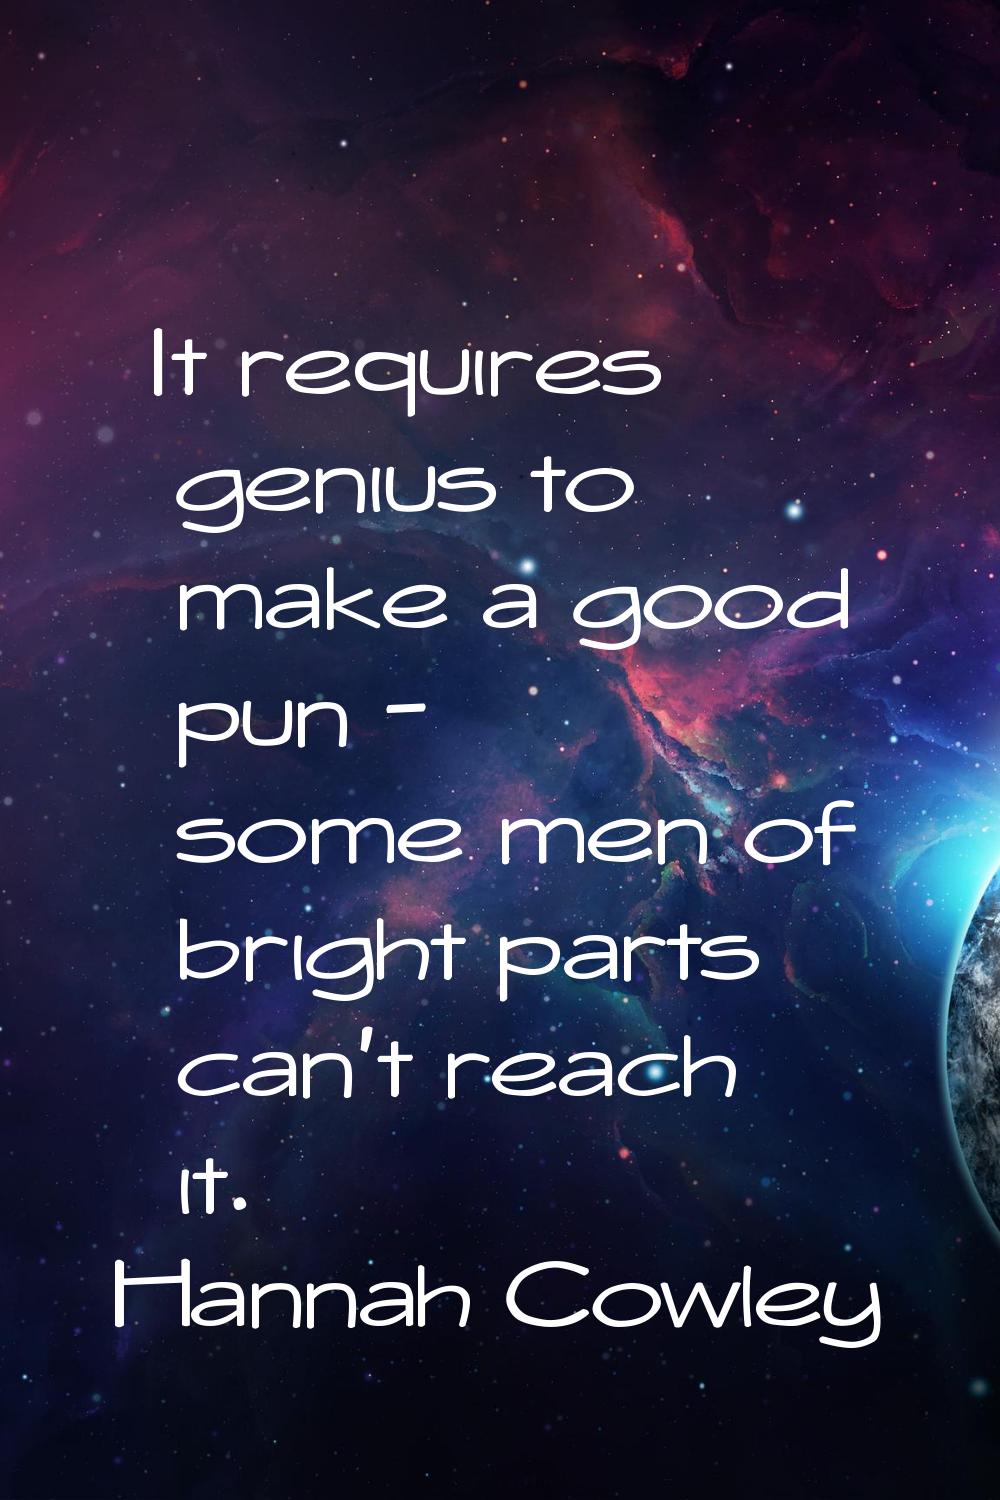 It requires genius to make a good pun - some men of bright parts can't reach it.